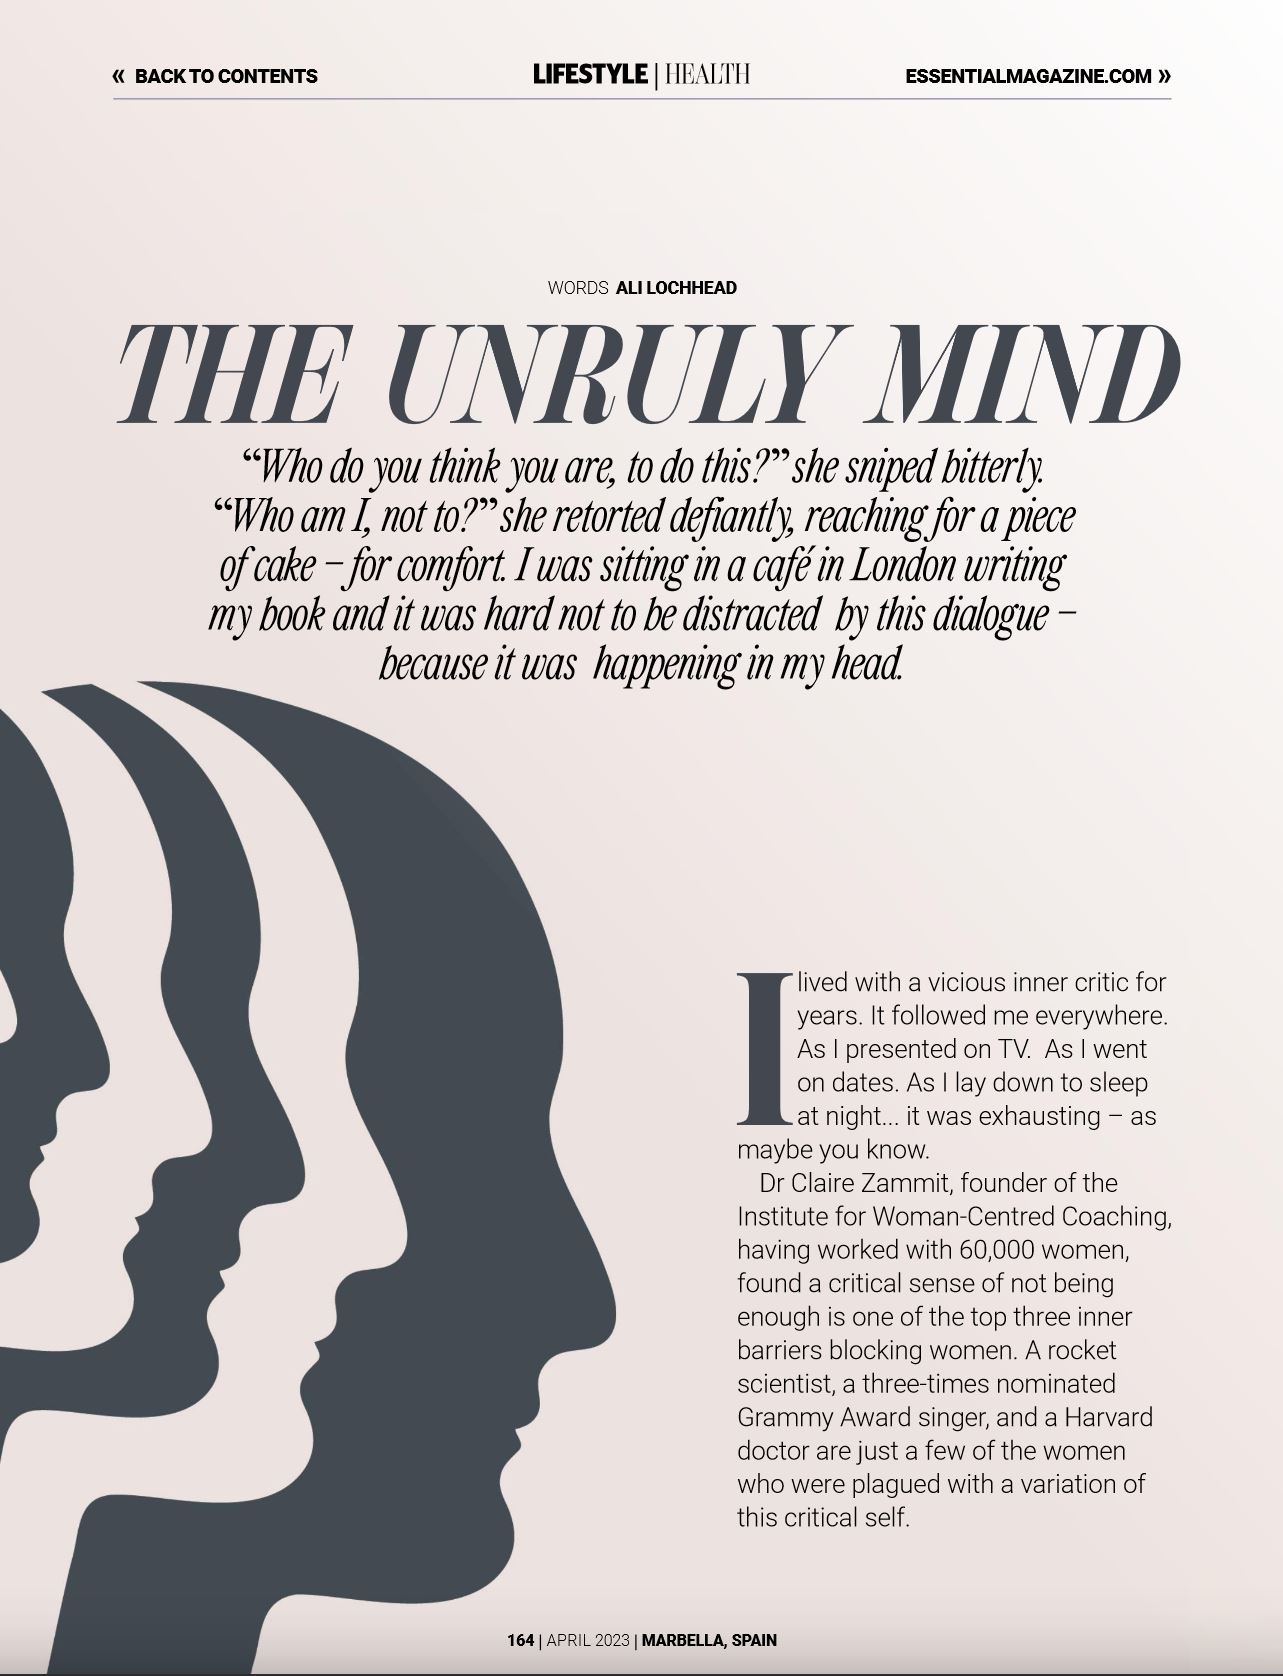 The Unruly Mind - How to Tame and Vicious Inner Critic by Ali Lochhead. An article in Marbella Essential Magazine